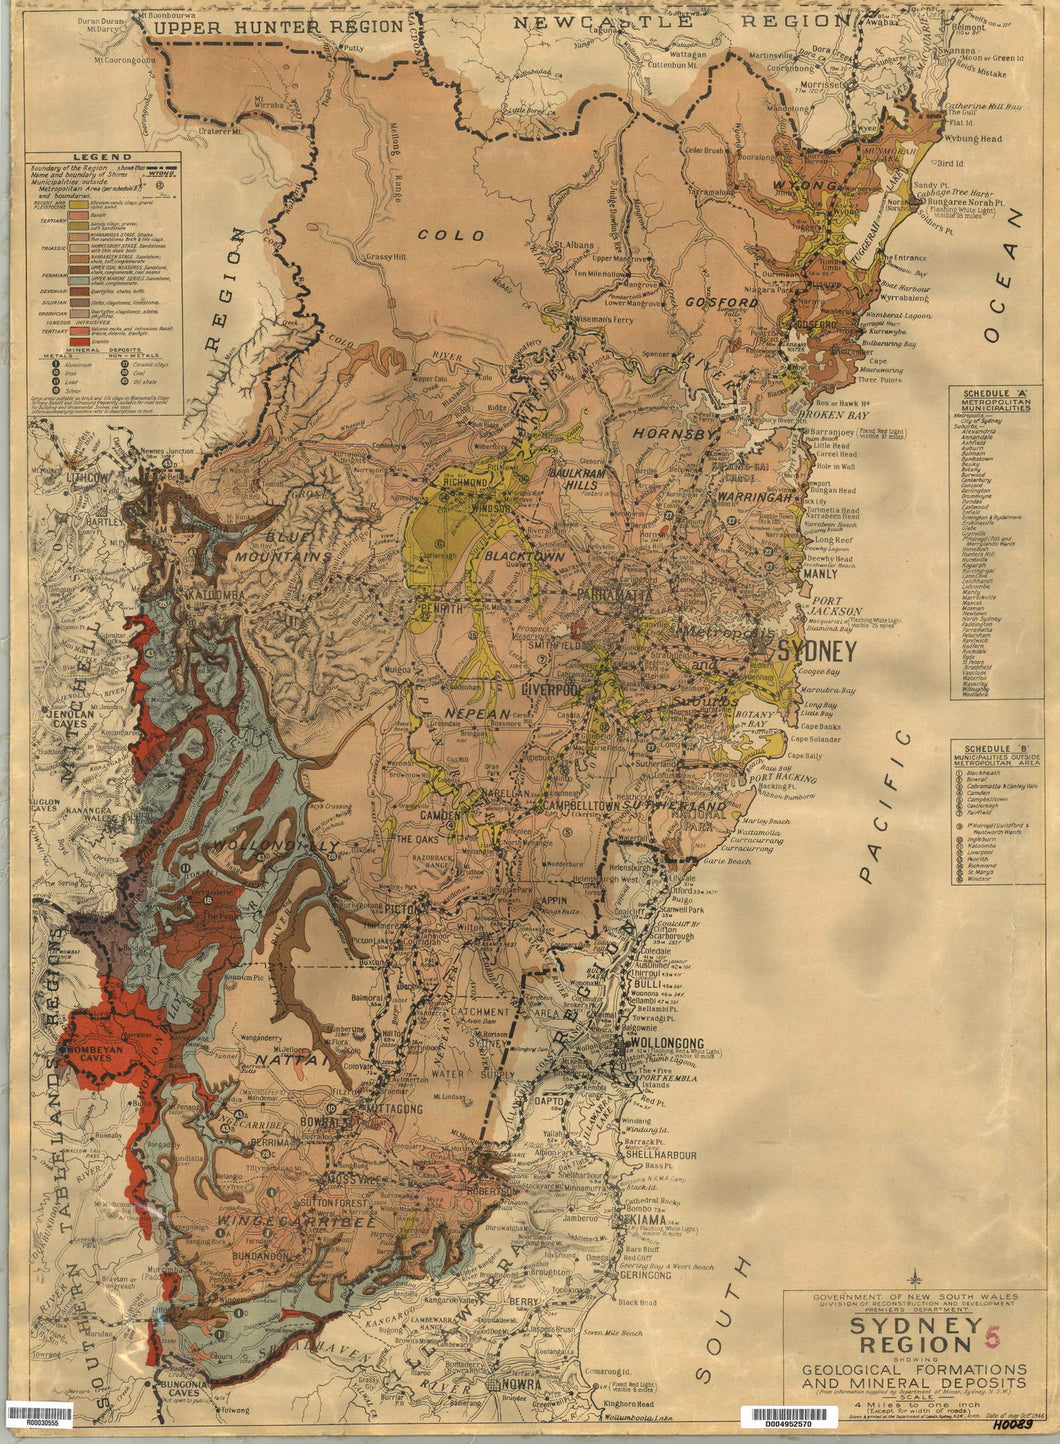 Image of Map of Sydney Region Showing Geological Formations and Mineral Deposits, 1946  map